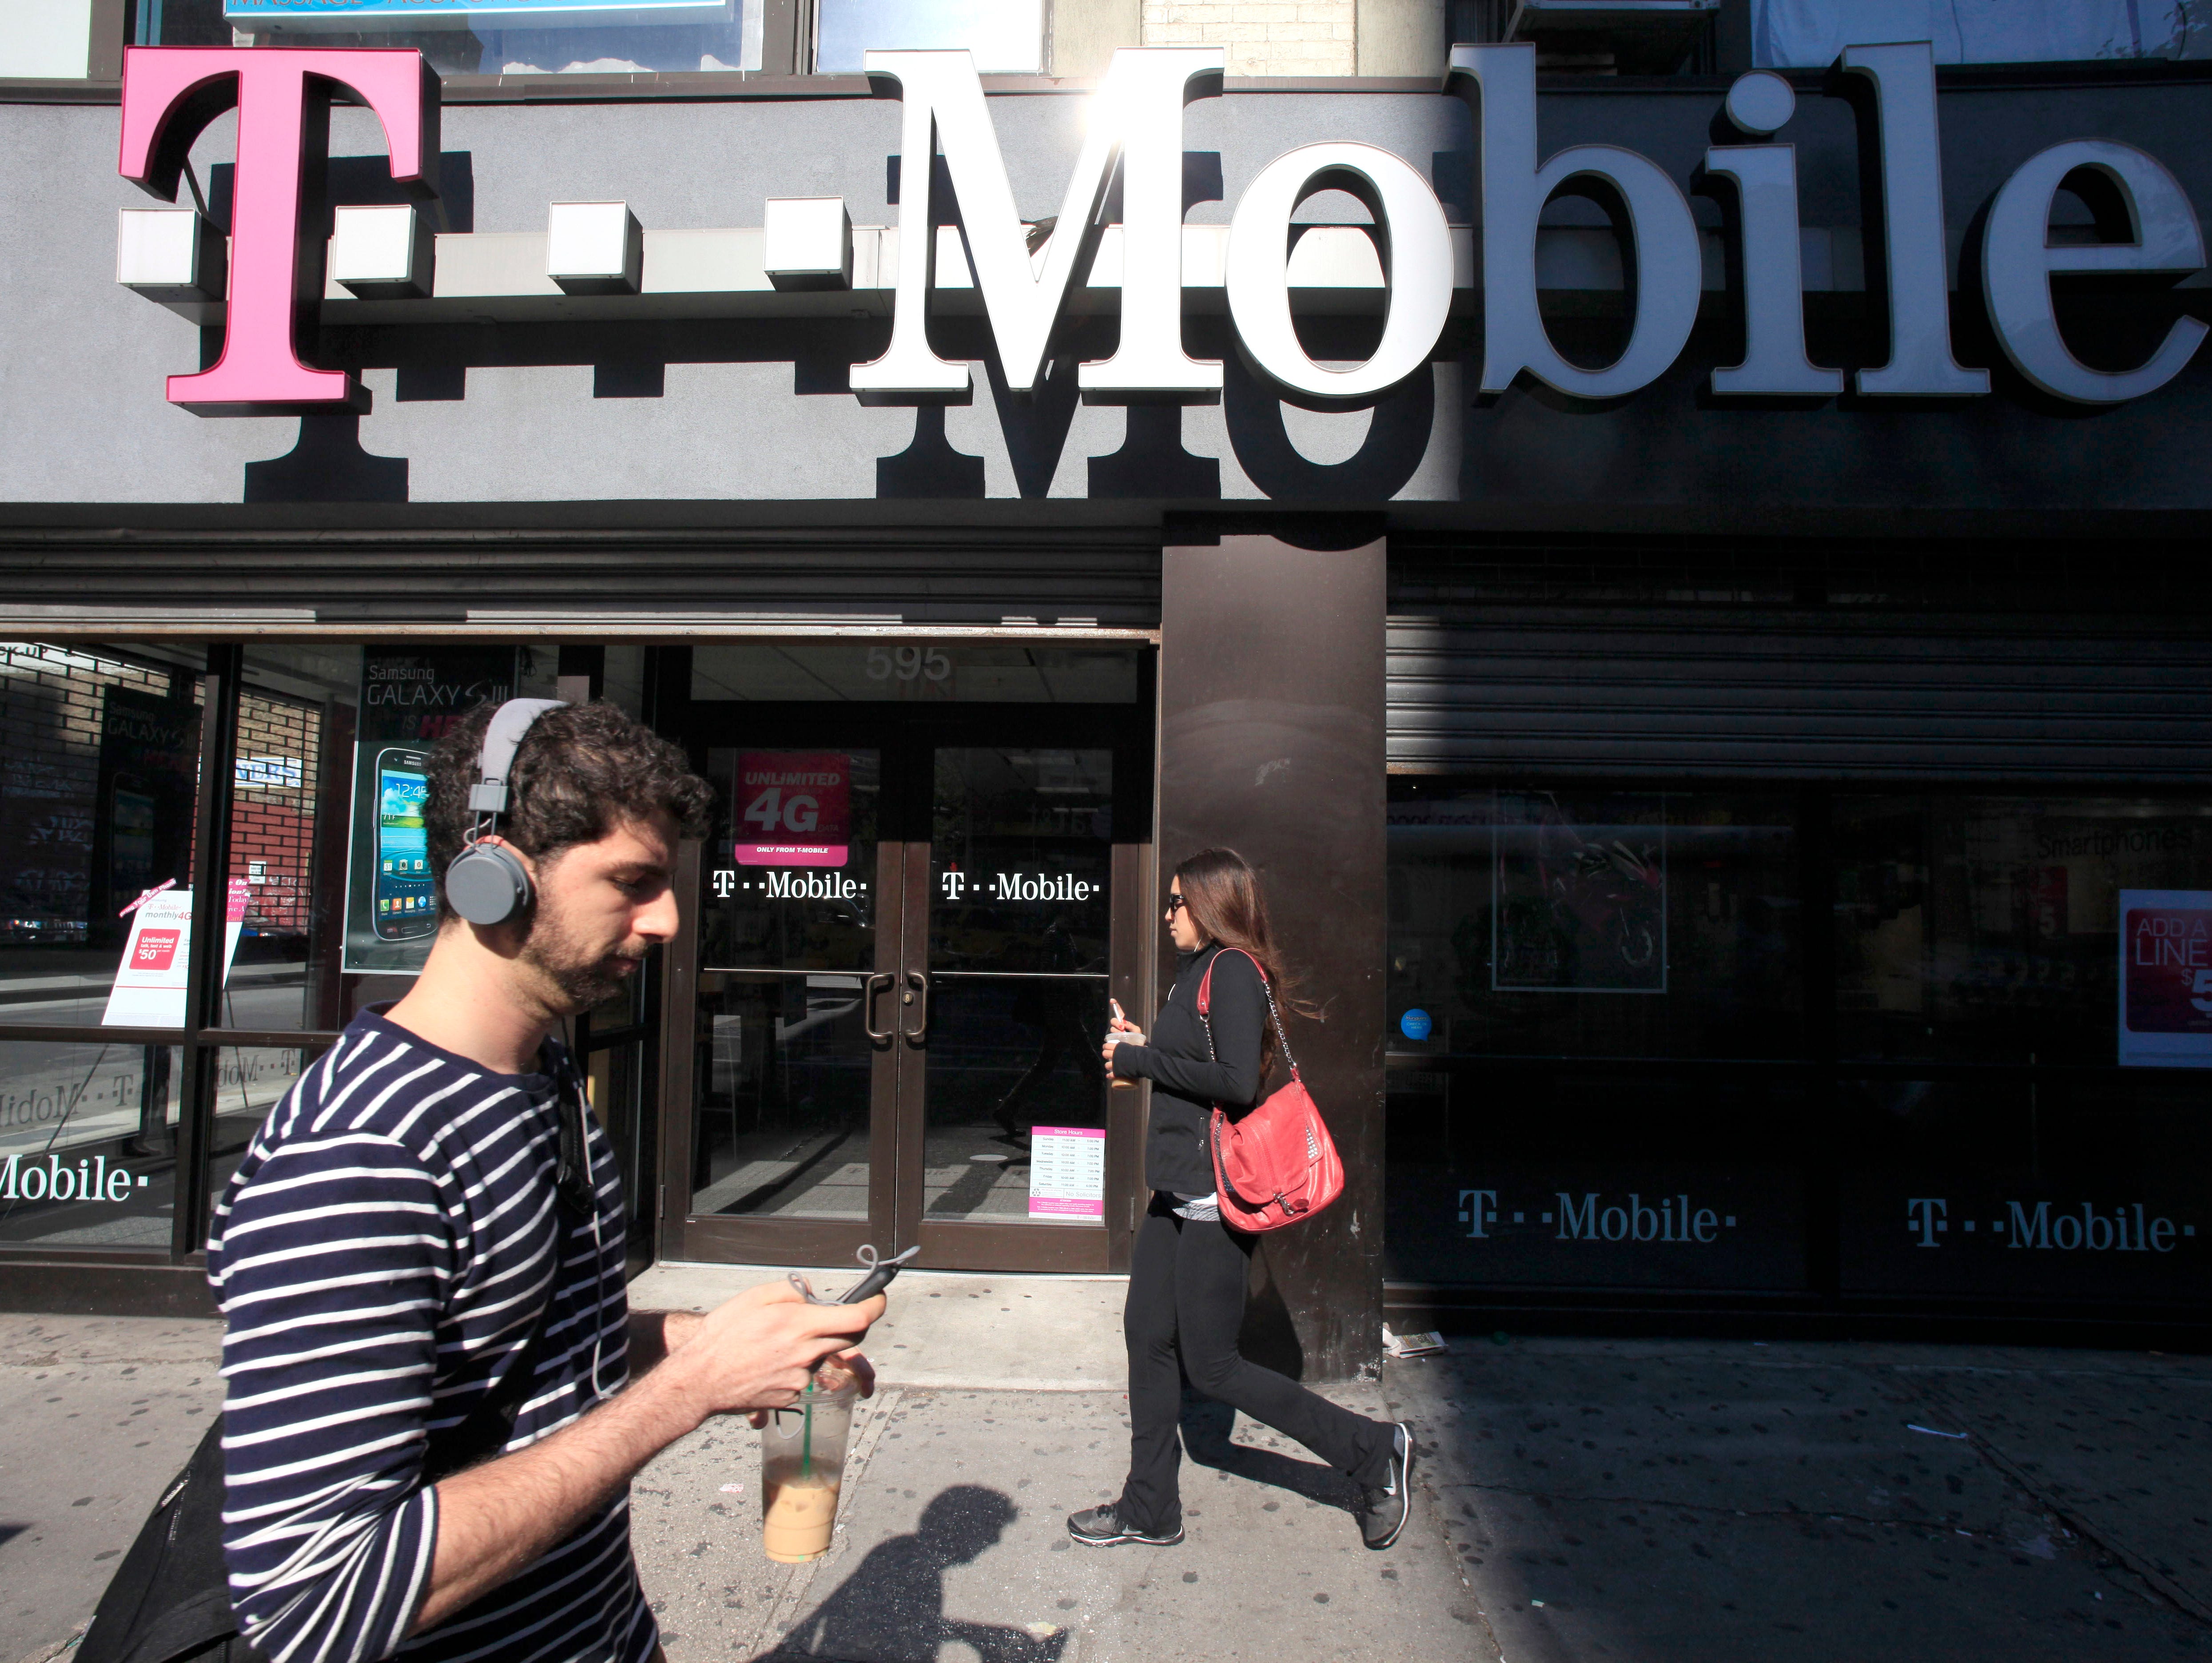 In this Sept. 12, 2012 file photo, a man uses a cellphone as he passes a T-Mobile store in New York. Credit reporting agency Experian on Thursday, Oct. 1, 2015 said that hackers accessed the social security numbers, birthdates and other personal info